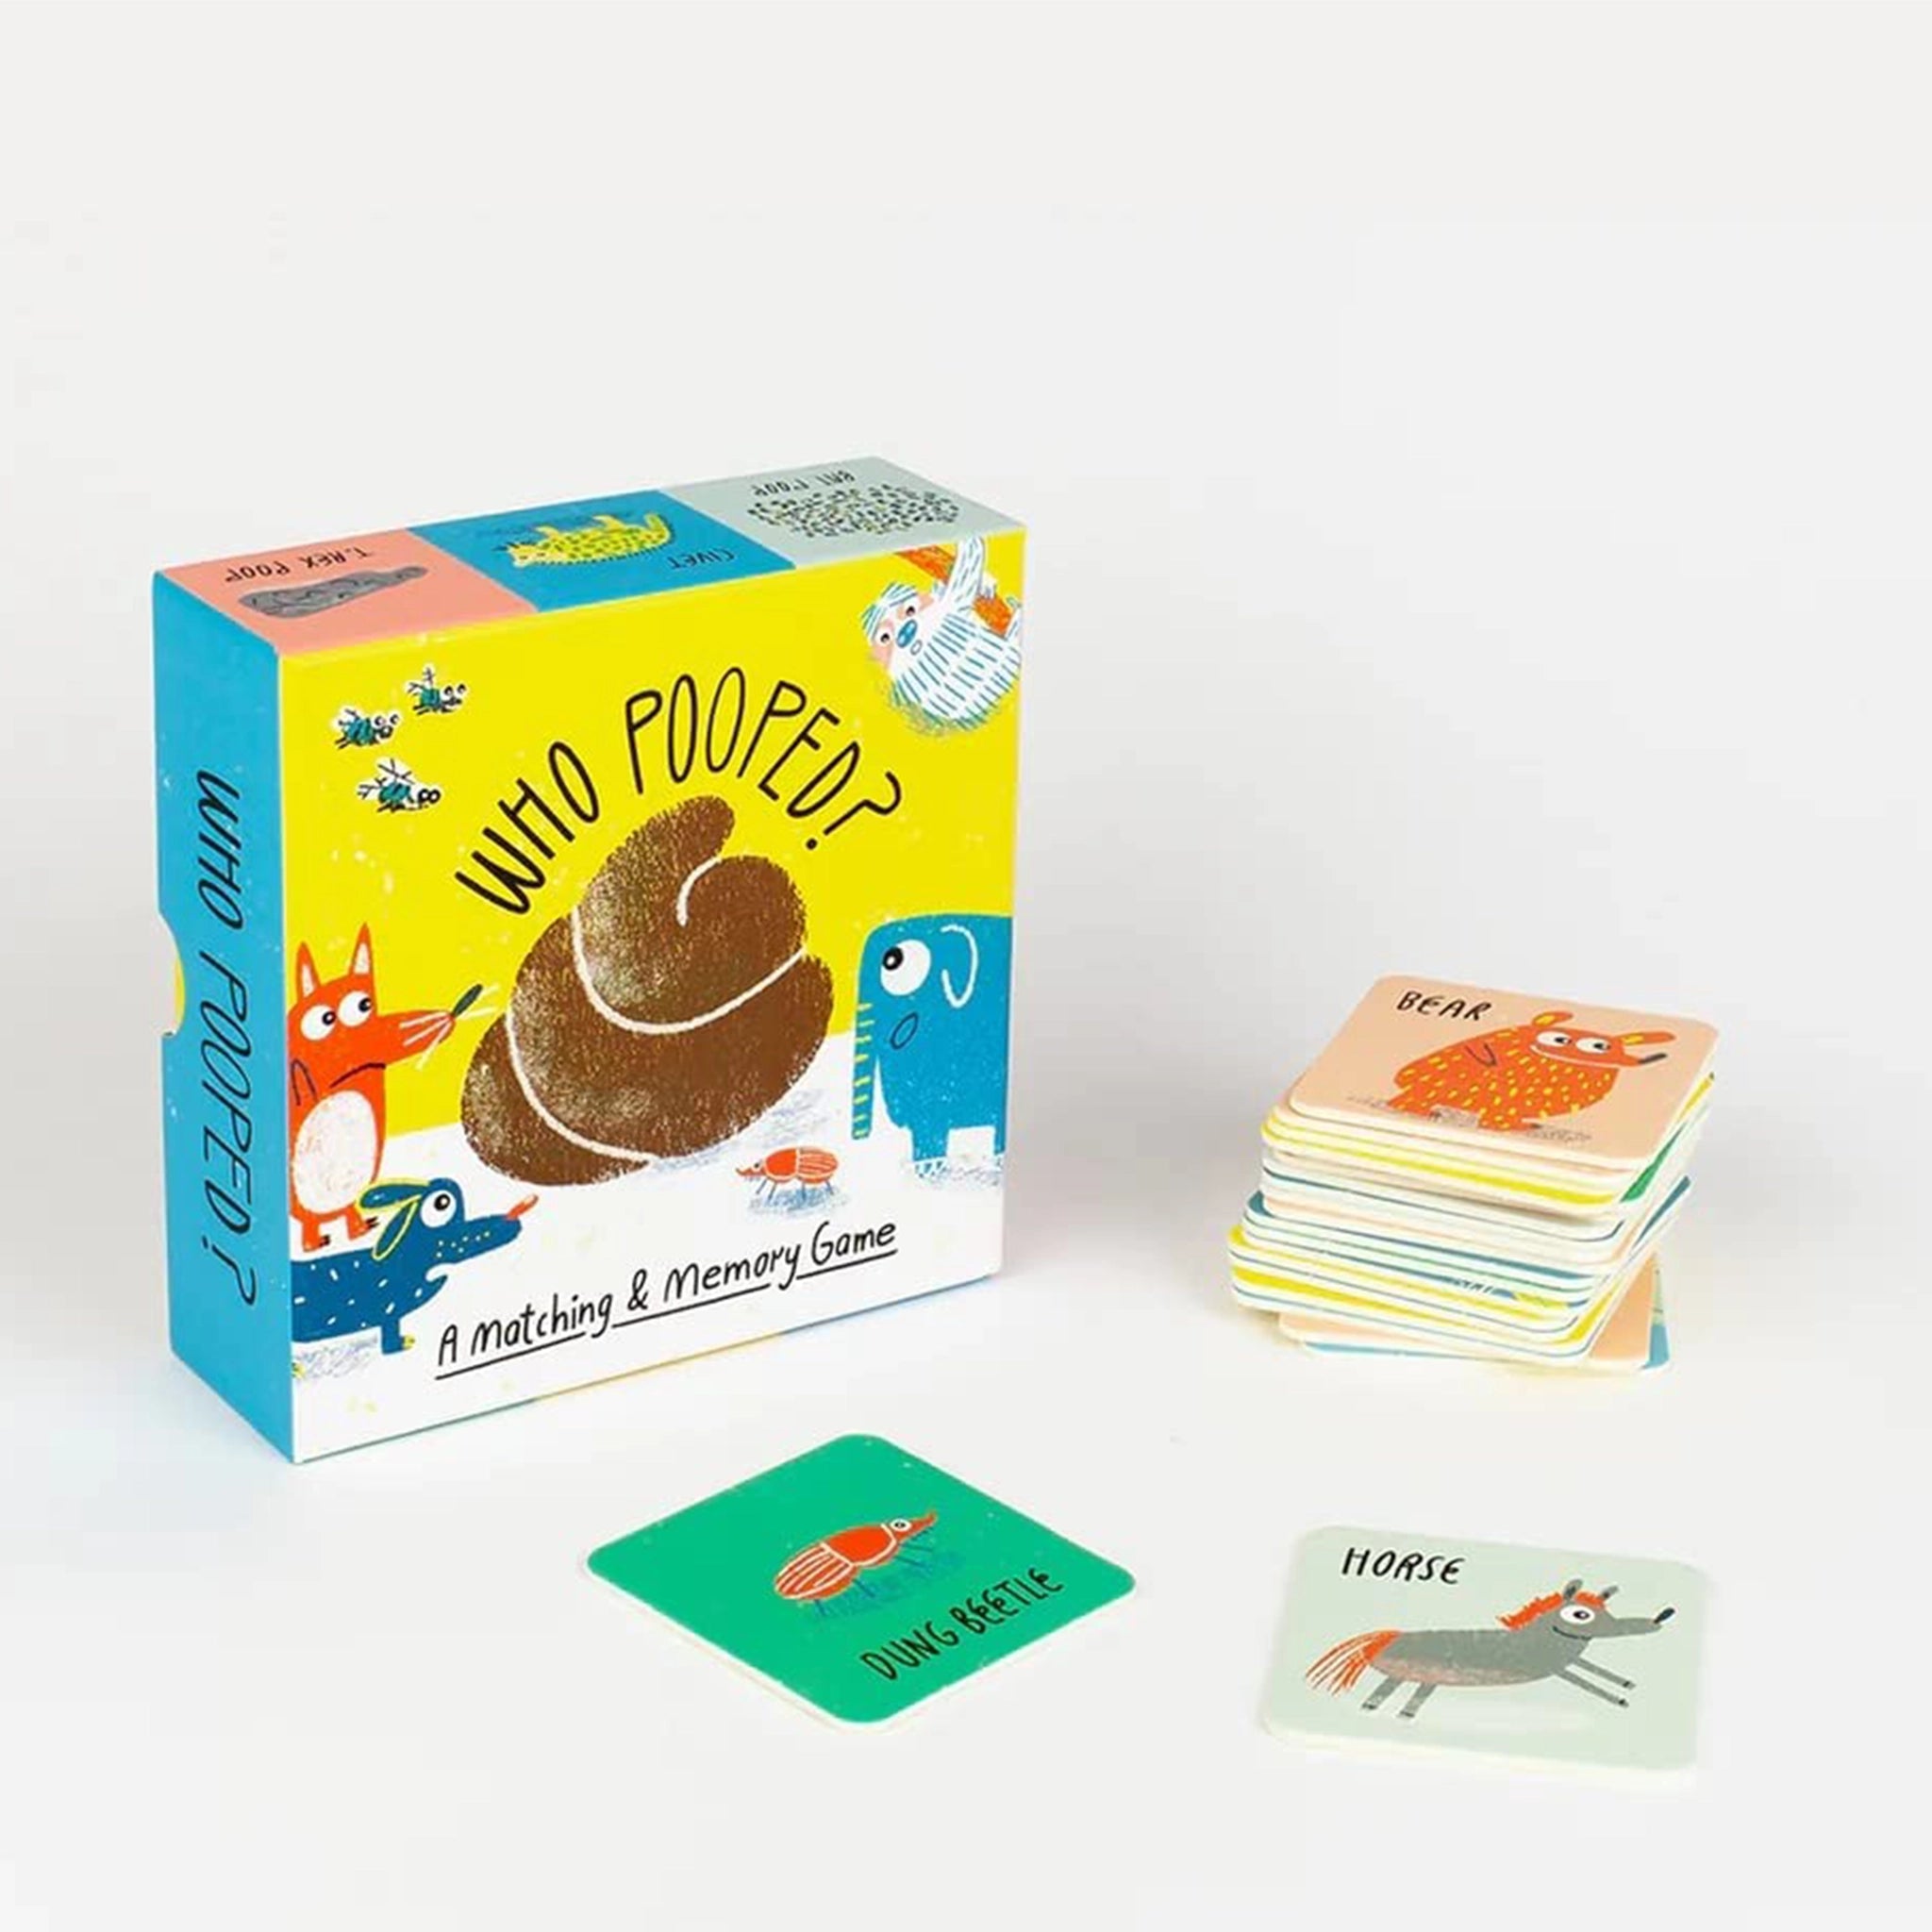 On a white background is a children's game with a colorful box featuring artwork of a pile of poop and various animal illustrations around it and cards staged outside of the box with animals and their names printed on the front of the card. 